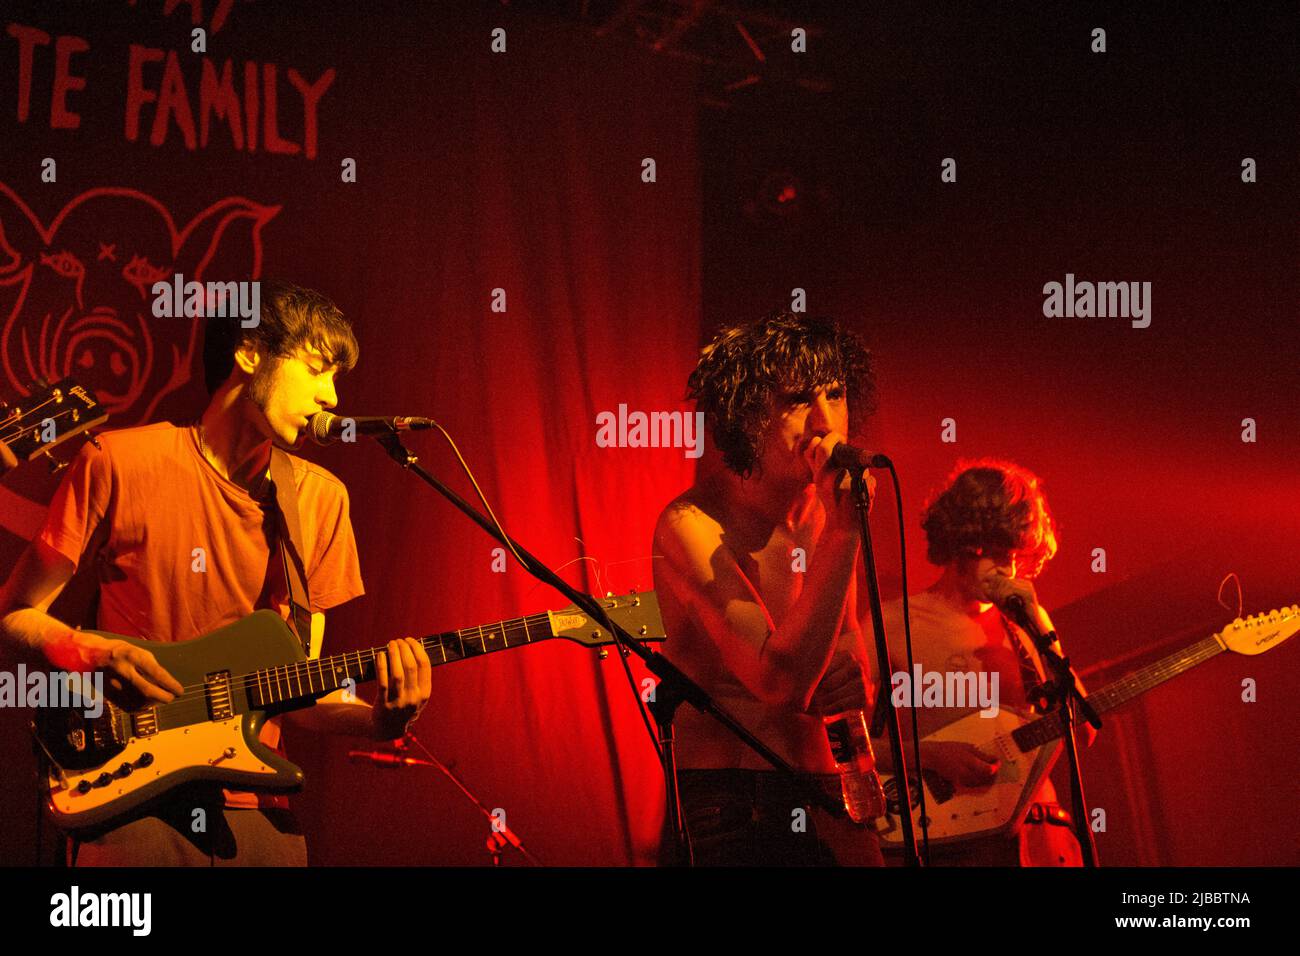 The Fat White Family perform at the School of Art, Glasgow on 16th September 2014 Stock Photo